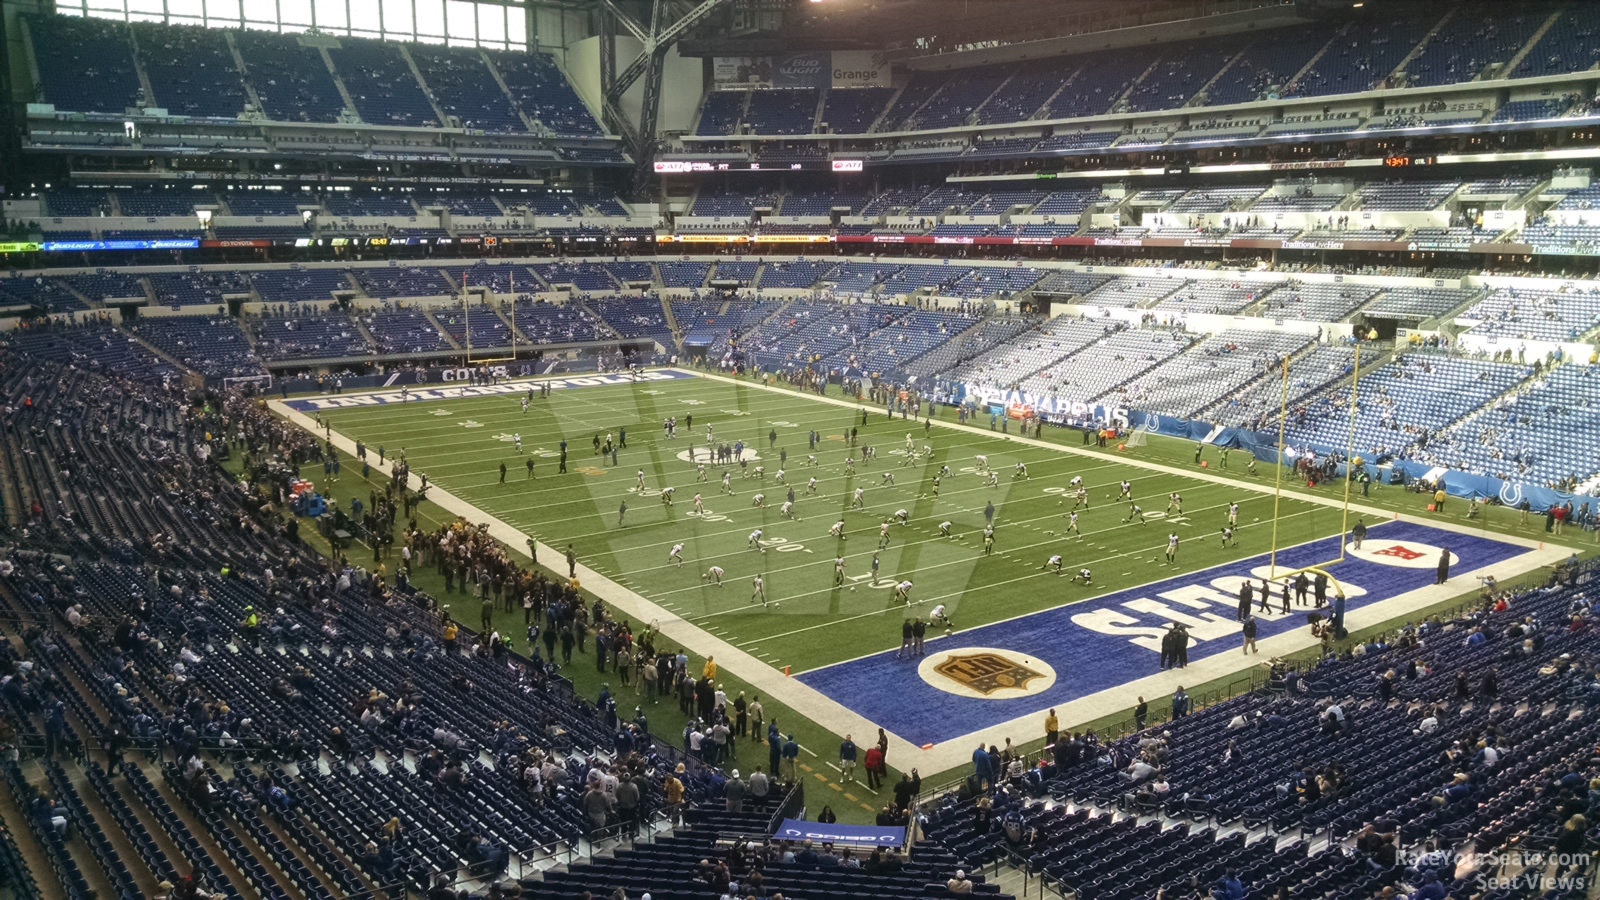 section 304, row 5 seat view  for football - lucas oil stadium